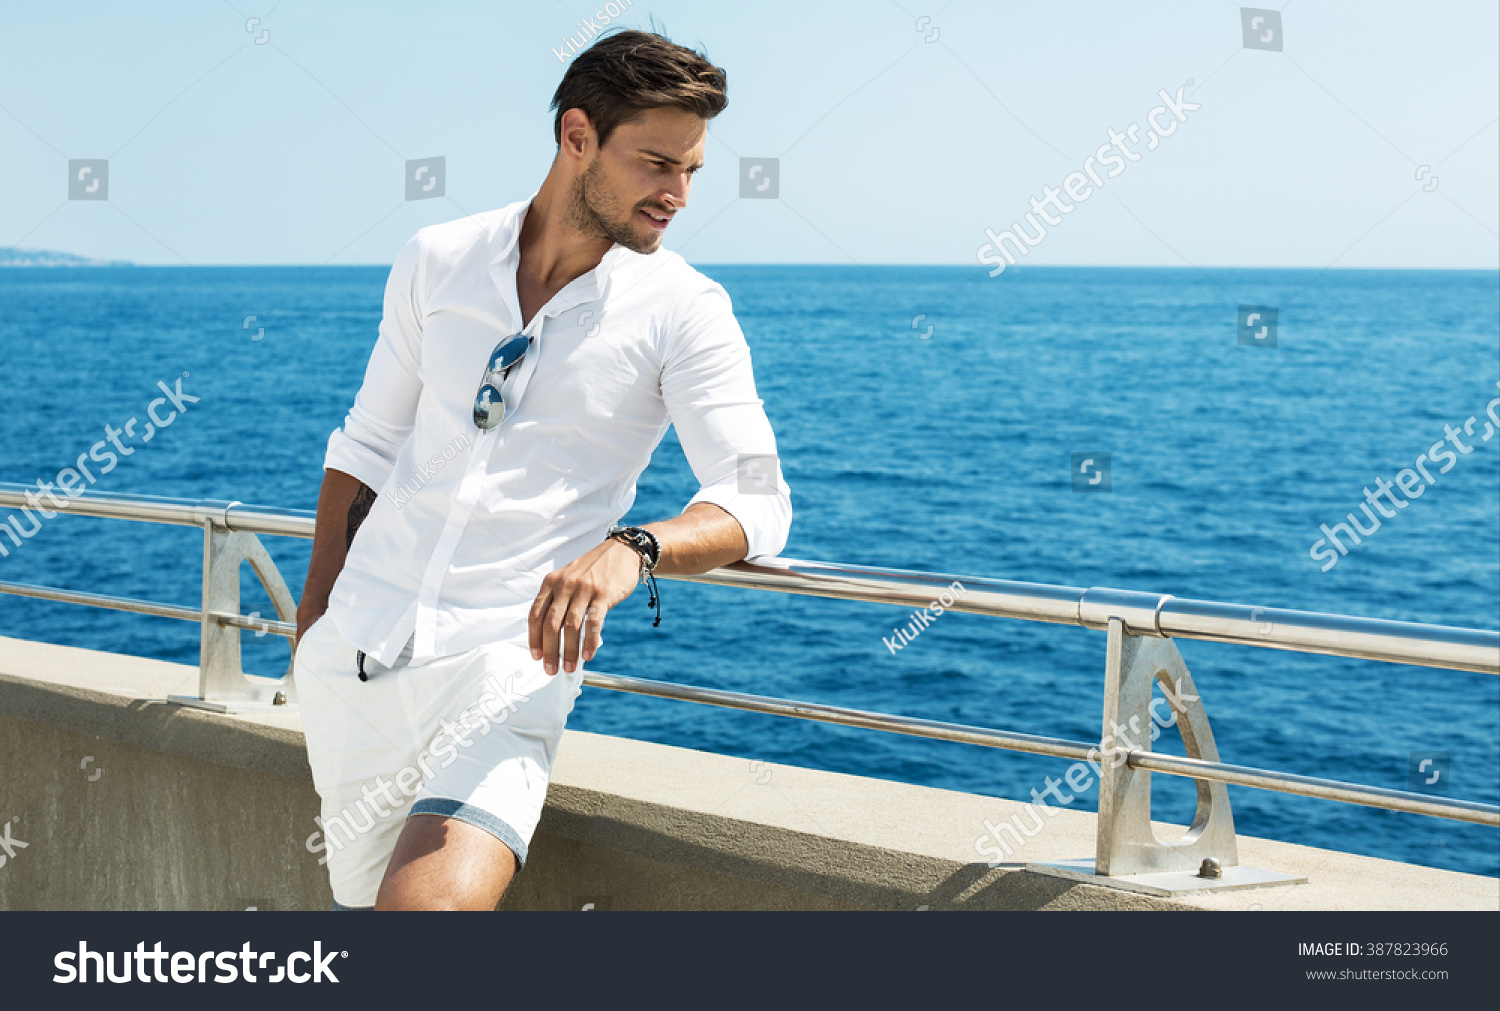 Handsome man wearing white clothes posing in sea scenery #387823966